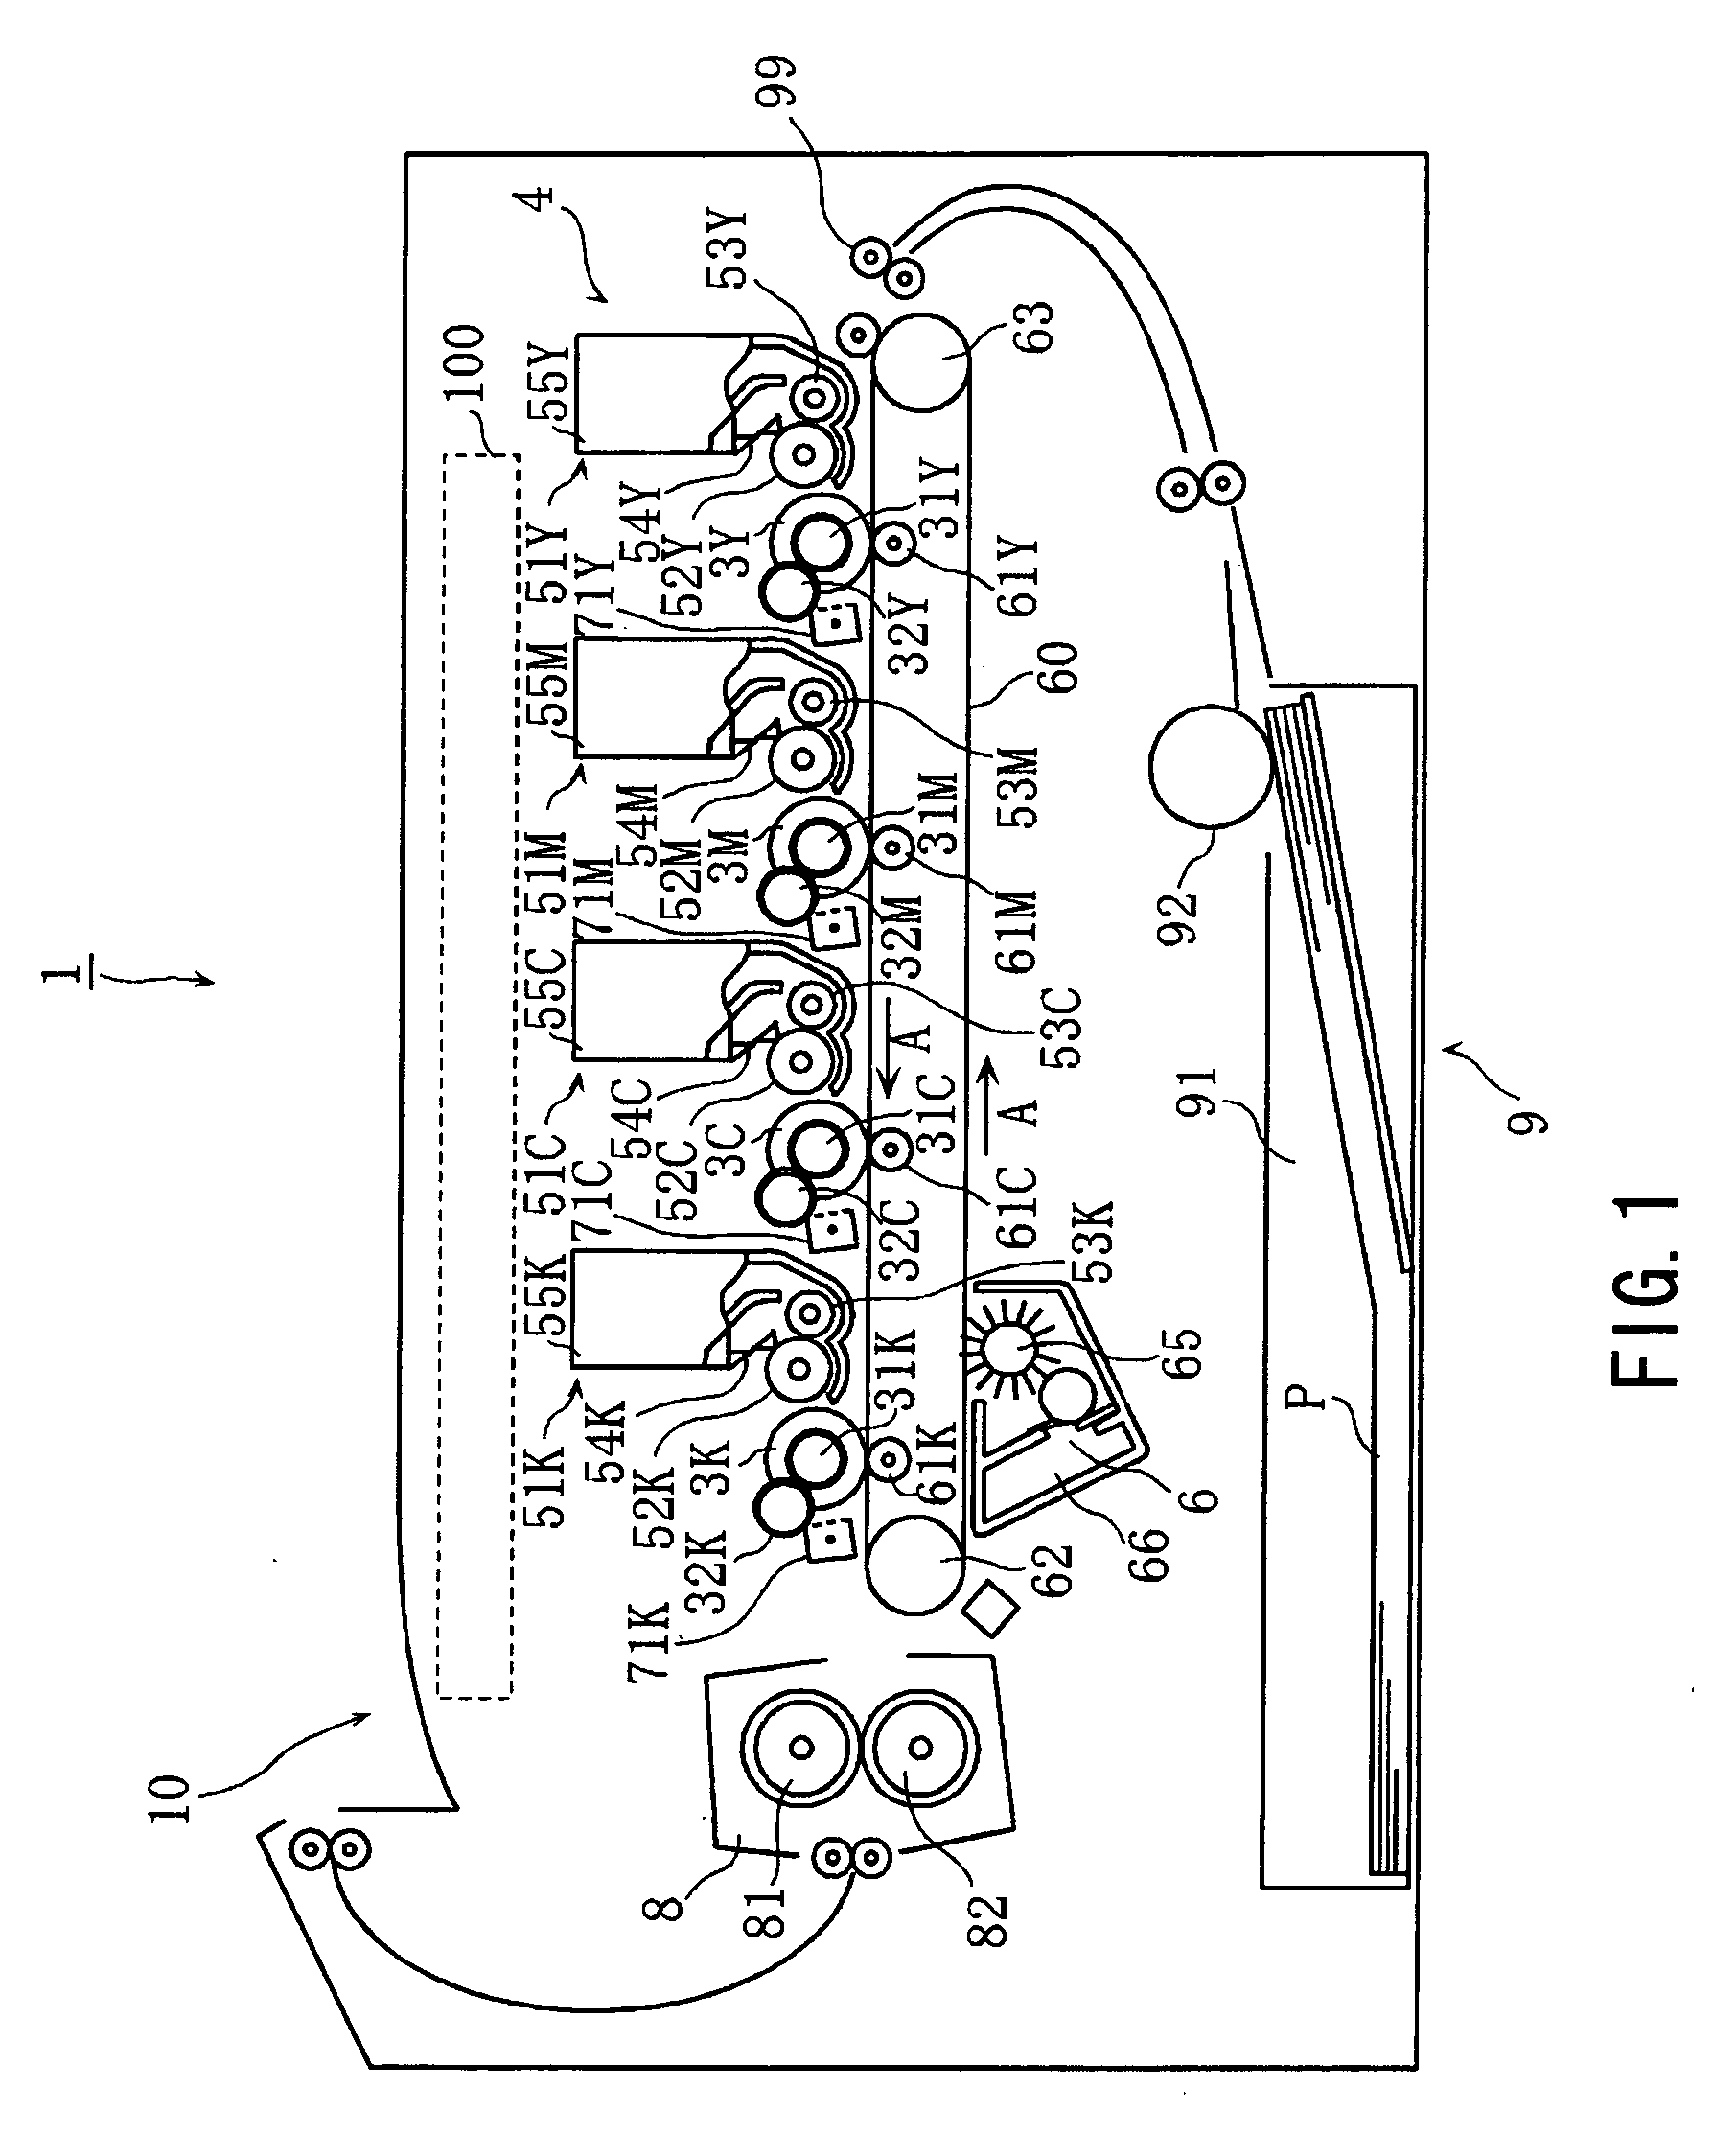 Image-forming device and scanning unit for use therein